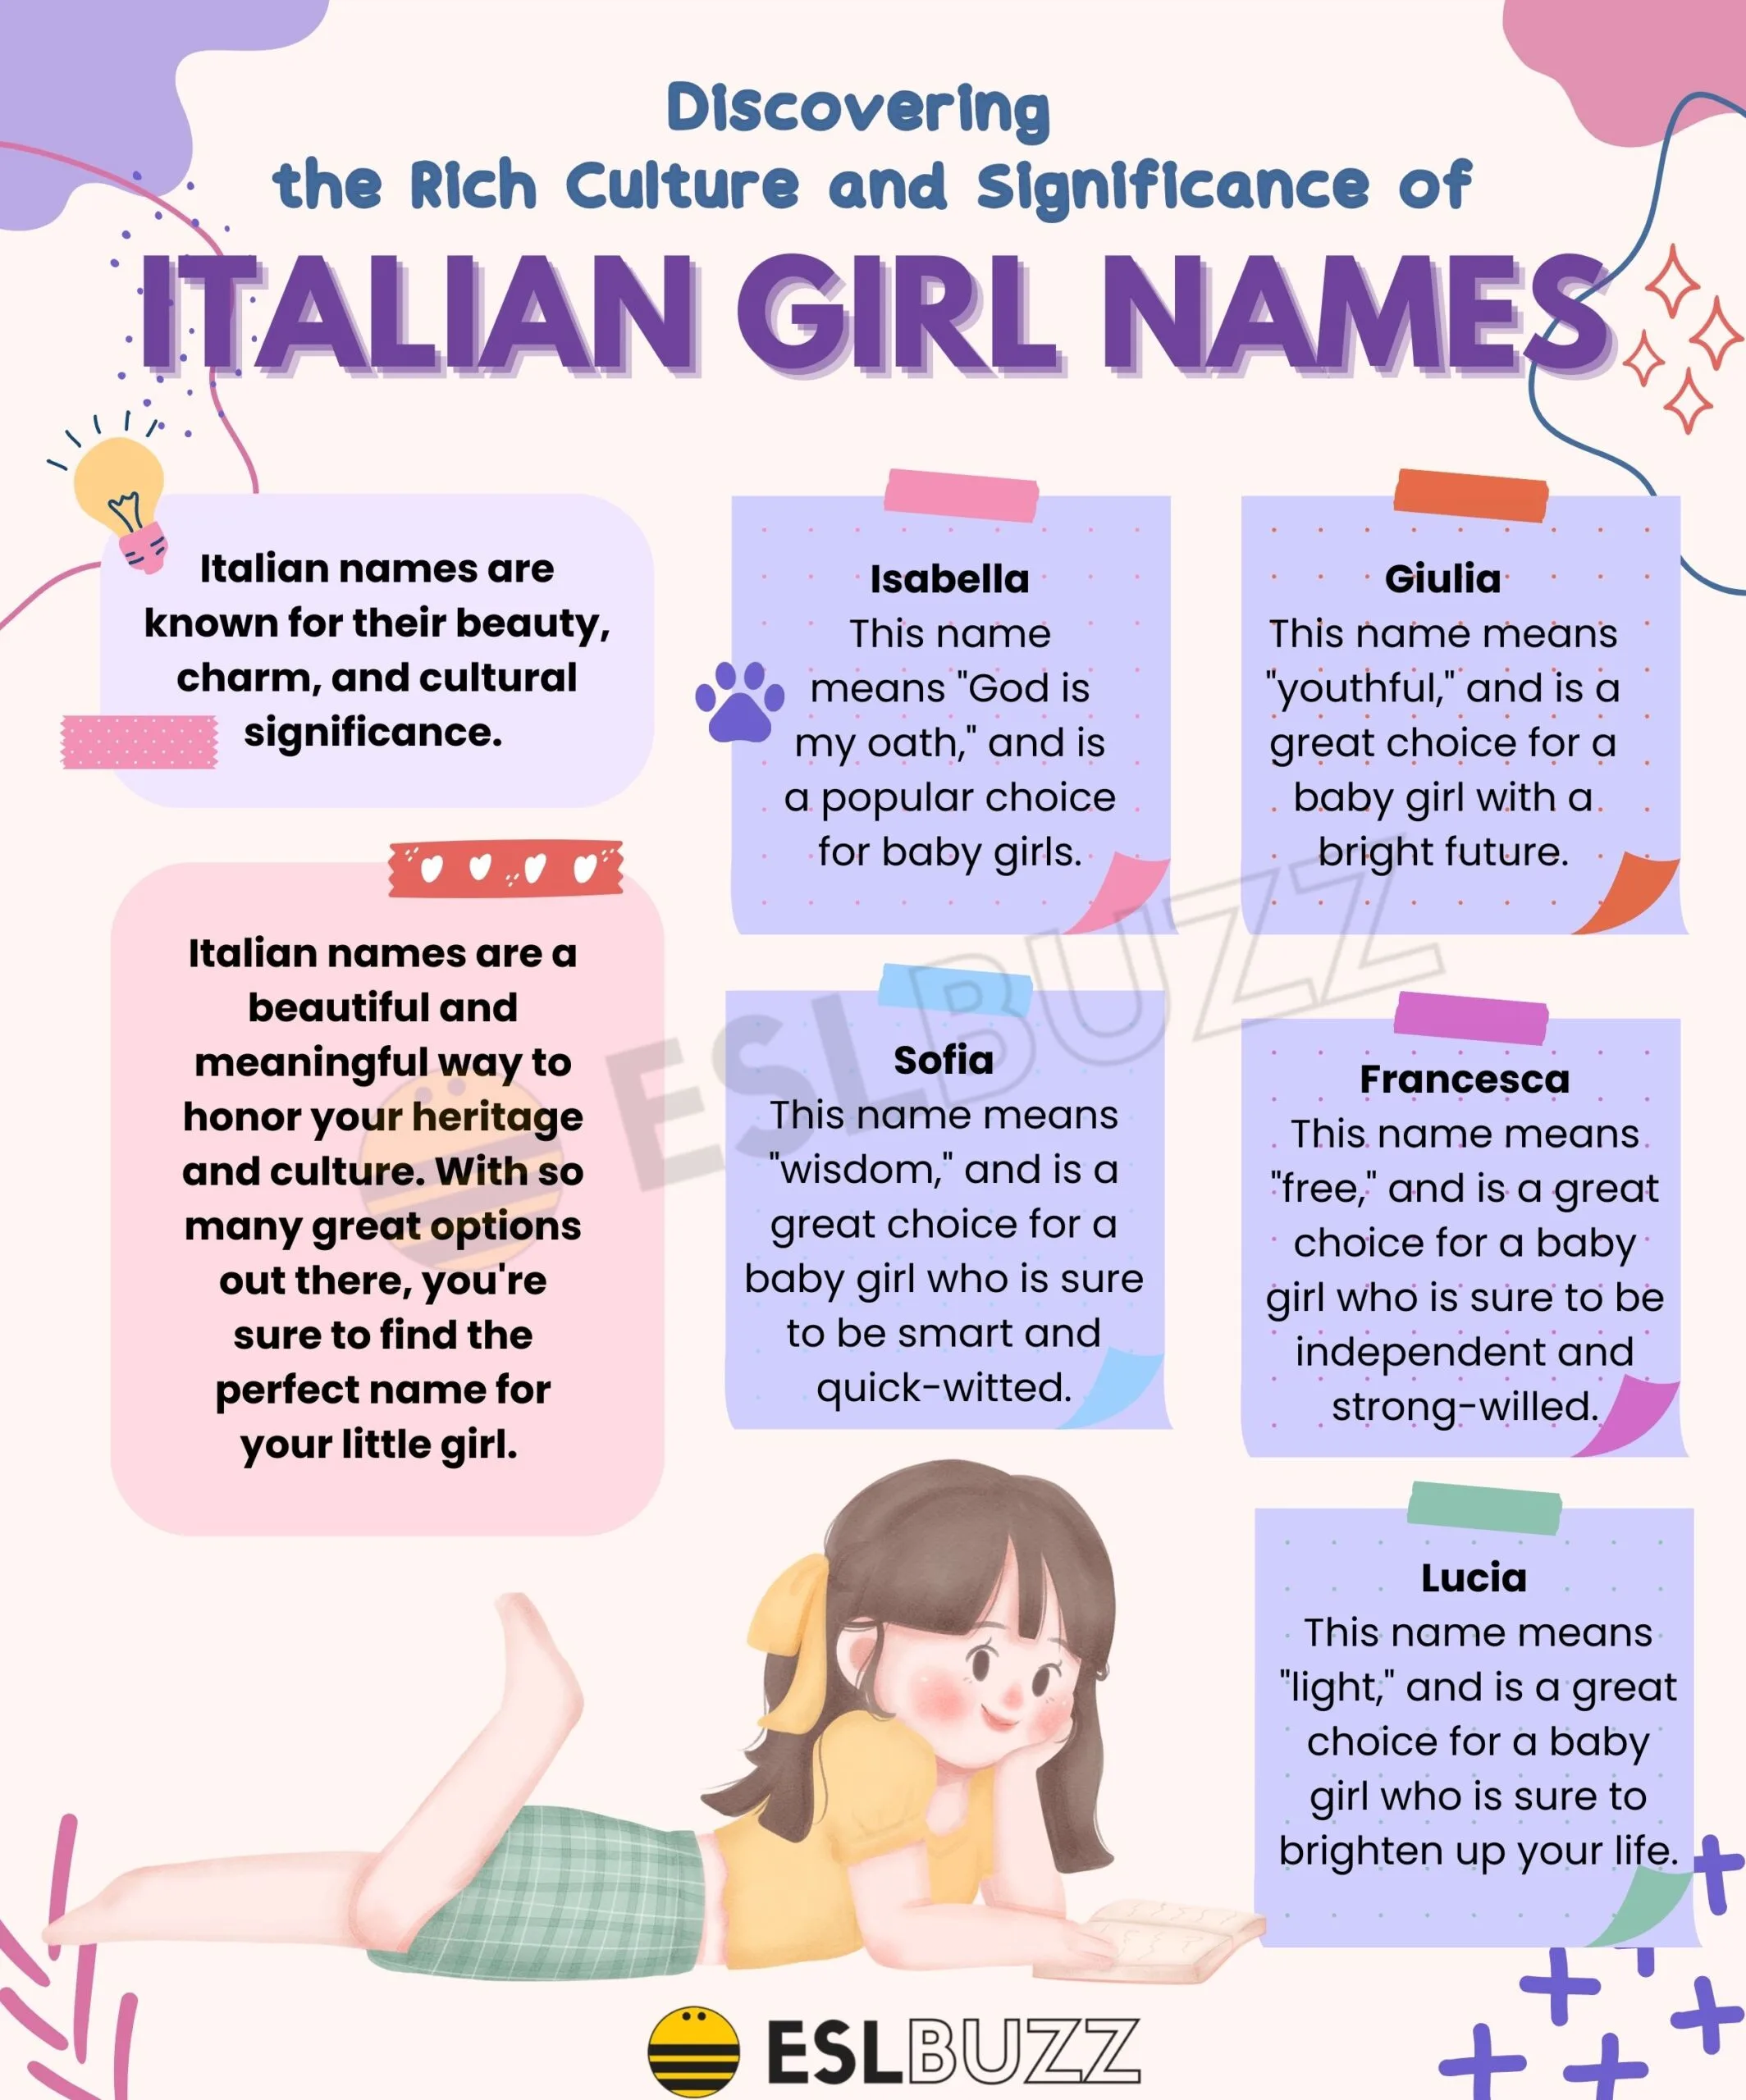 alan dumont recommends Sexy Italian Girl Names